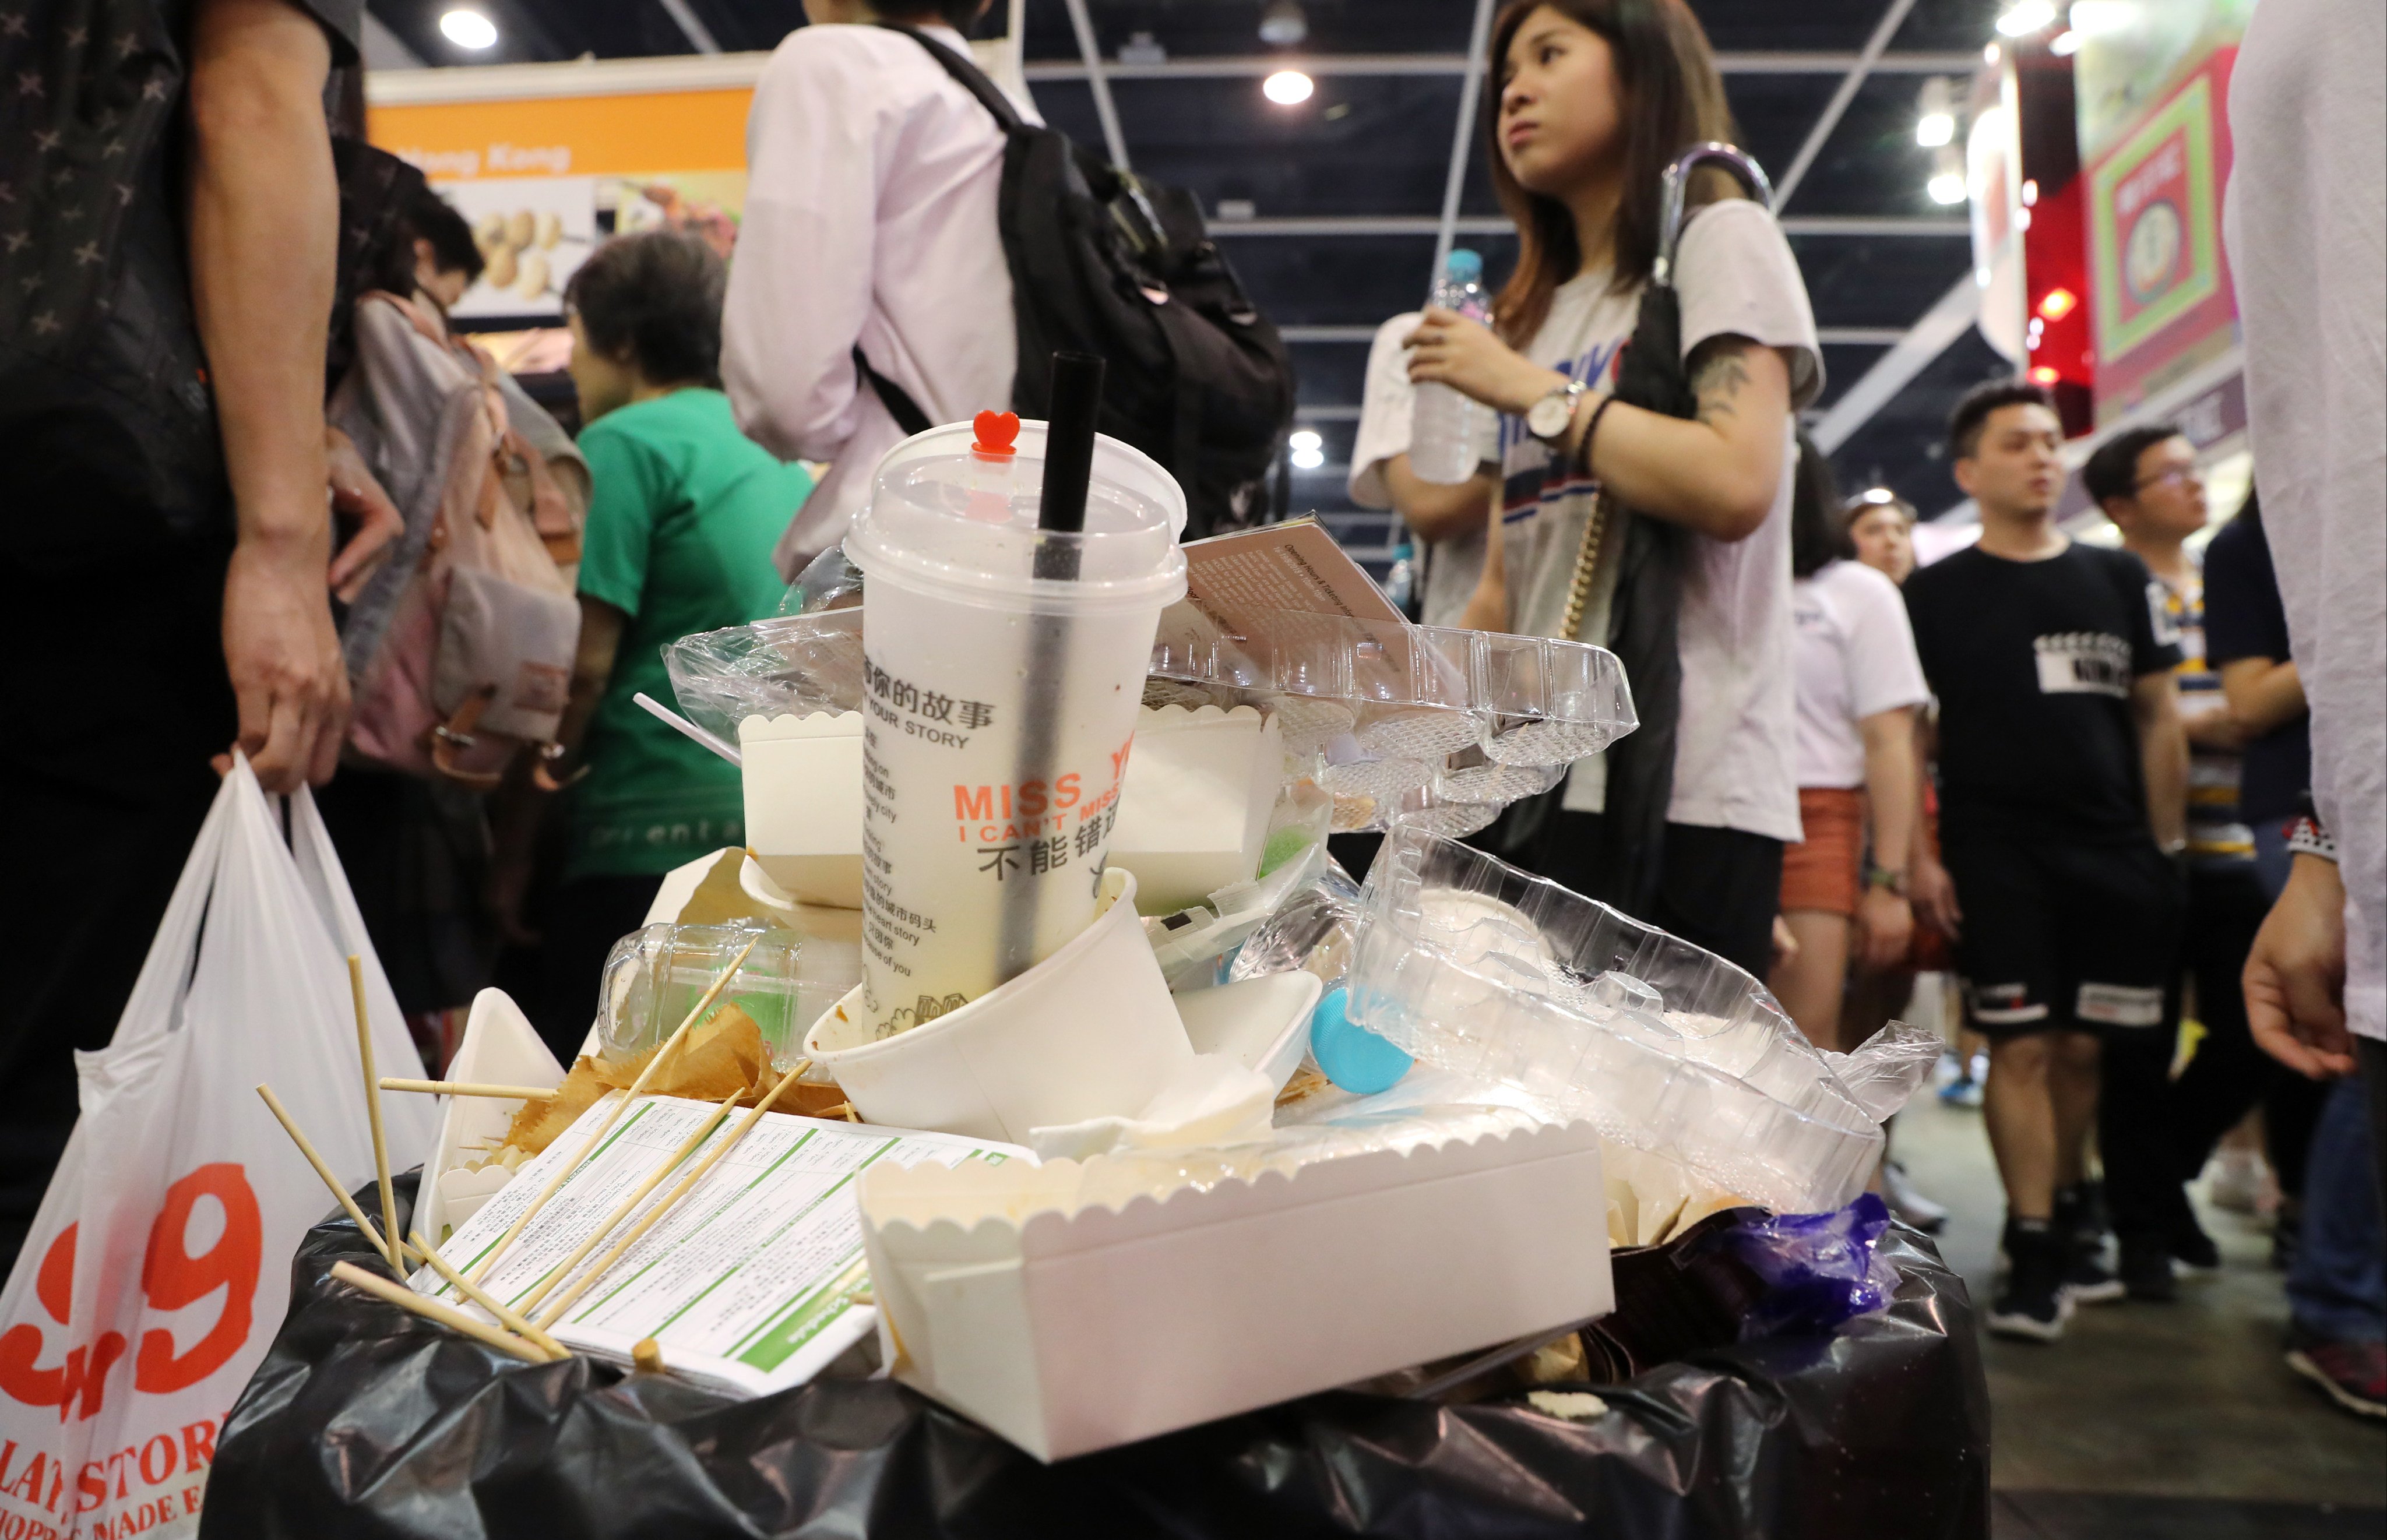 A check of a government website shows the application form for mega event funding makes no mention of waste and carbon reduction. Photo: K. Y. Cheng